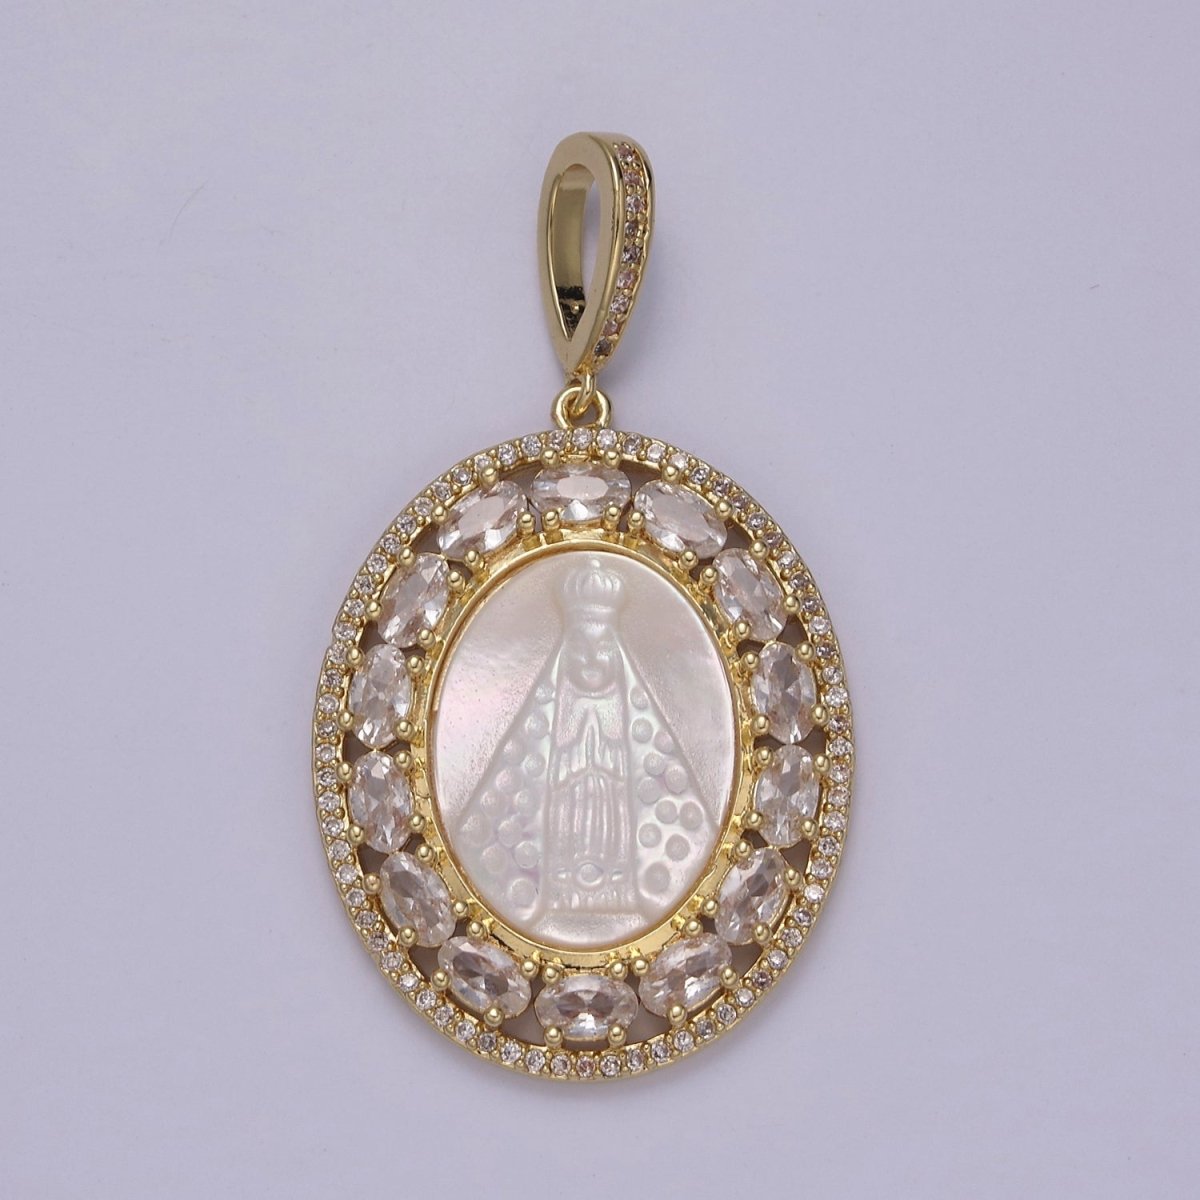 Antique Cameo Virgin Mary And Jesus Gold Pendant, Pearl Mary Pendant Religious Jewelry Making N-563 - DLUXCA